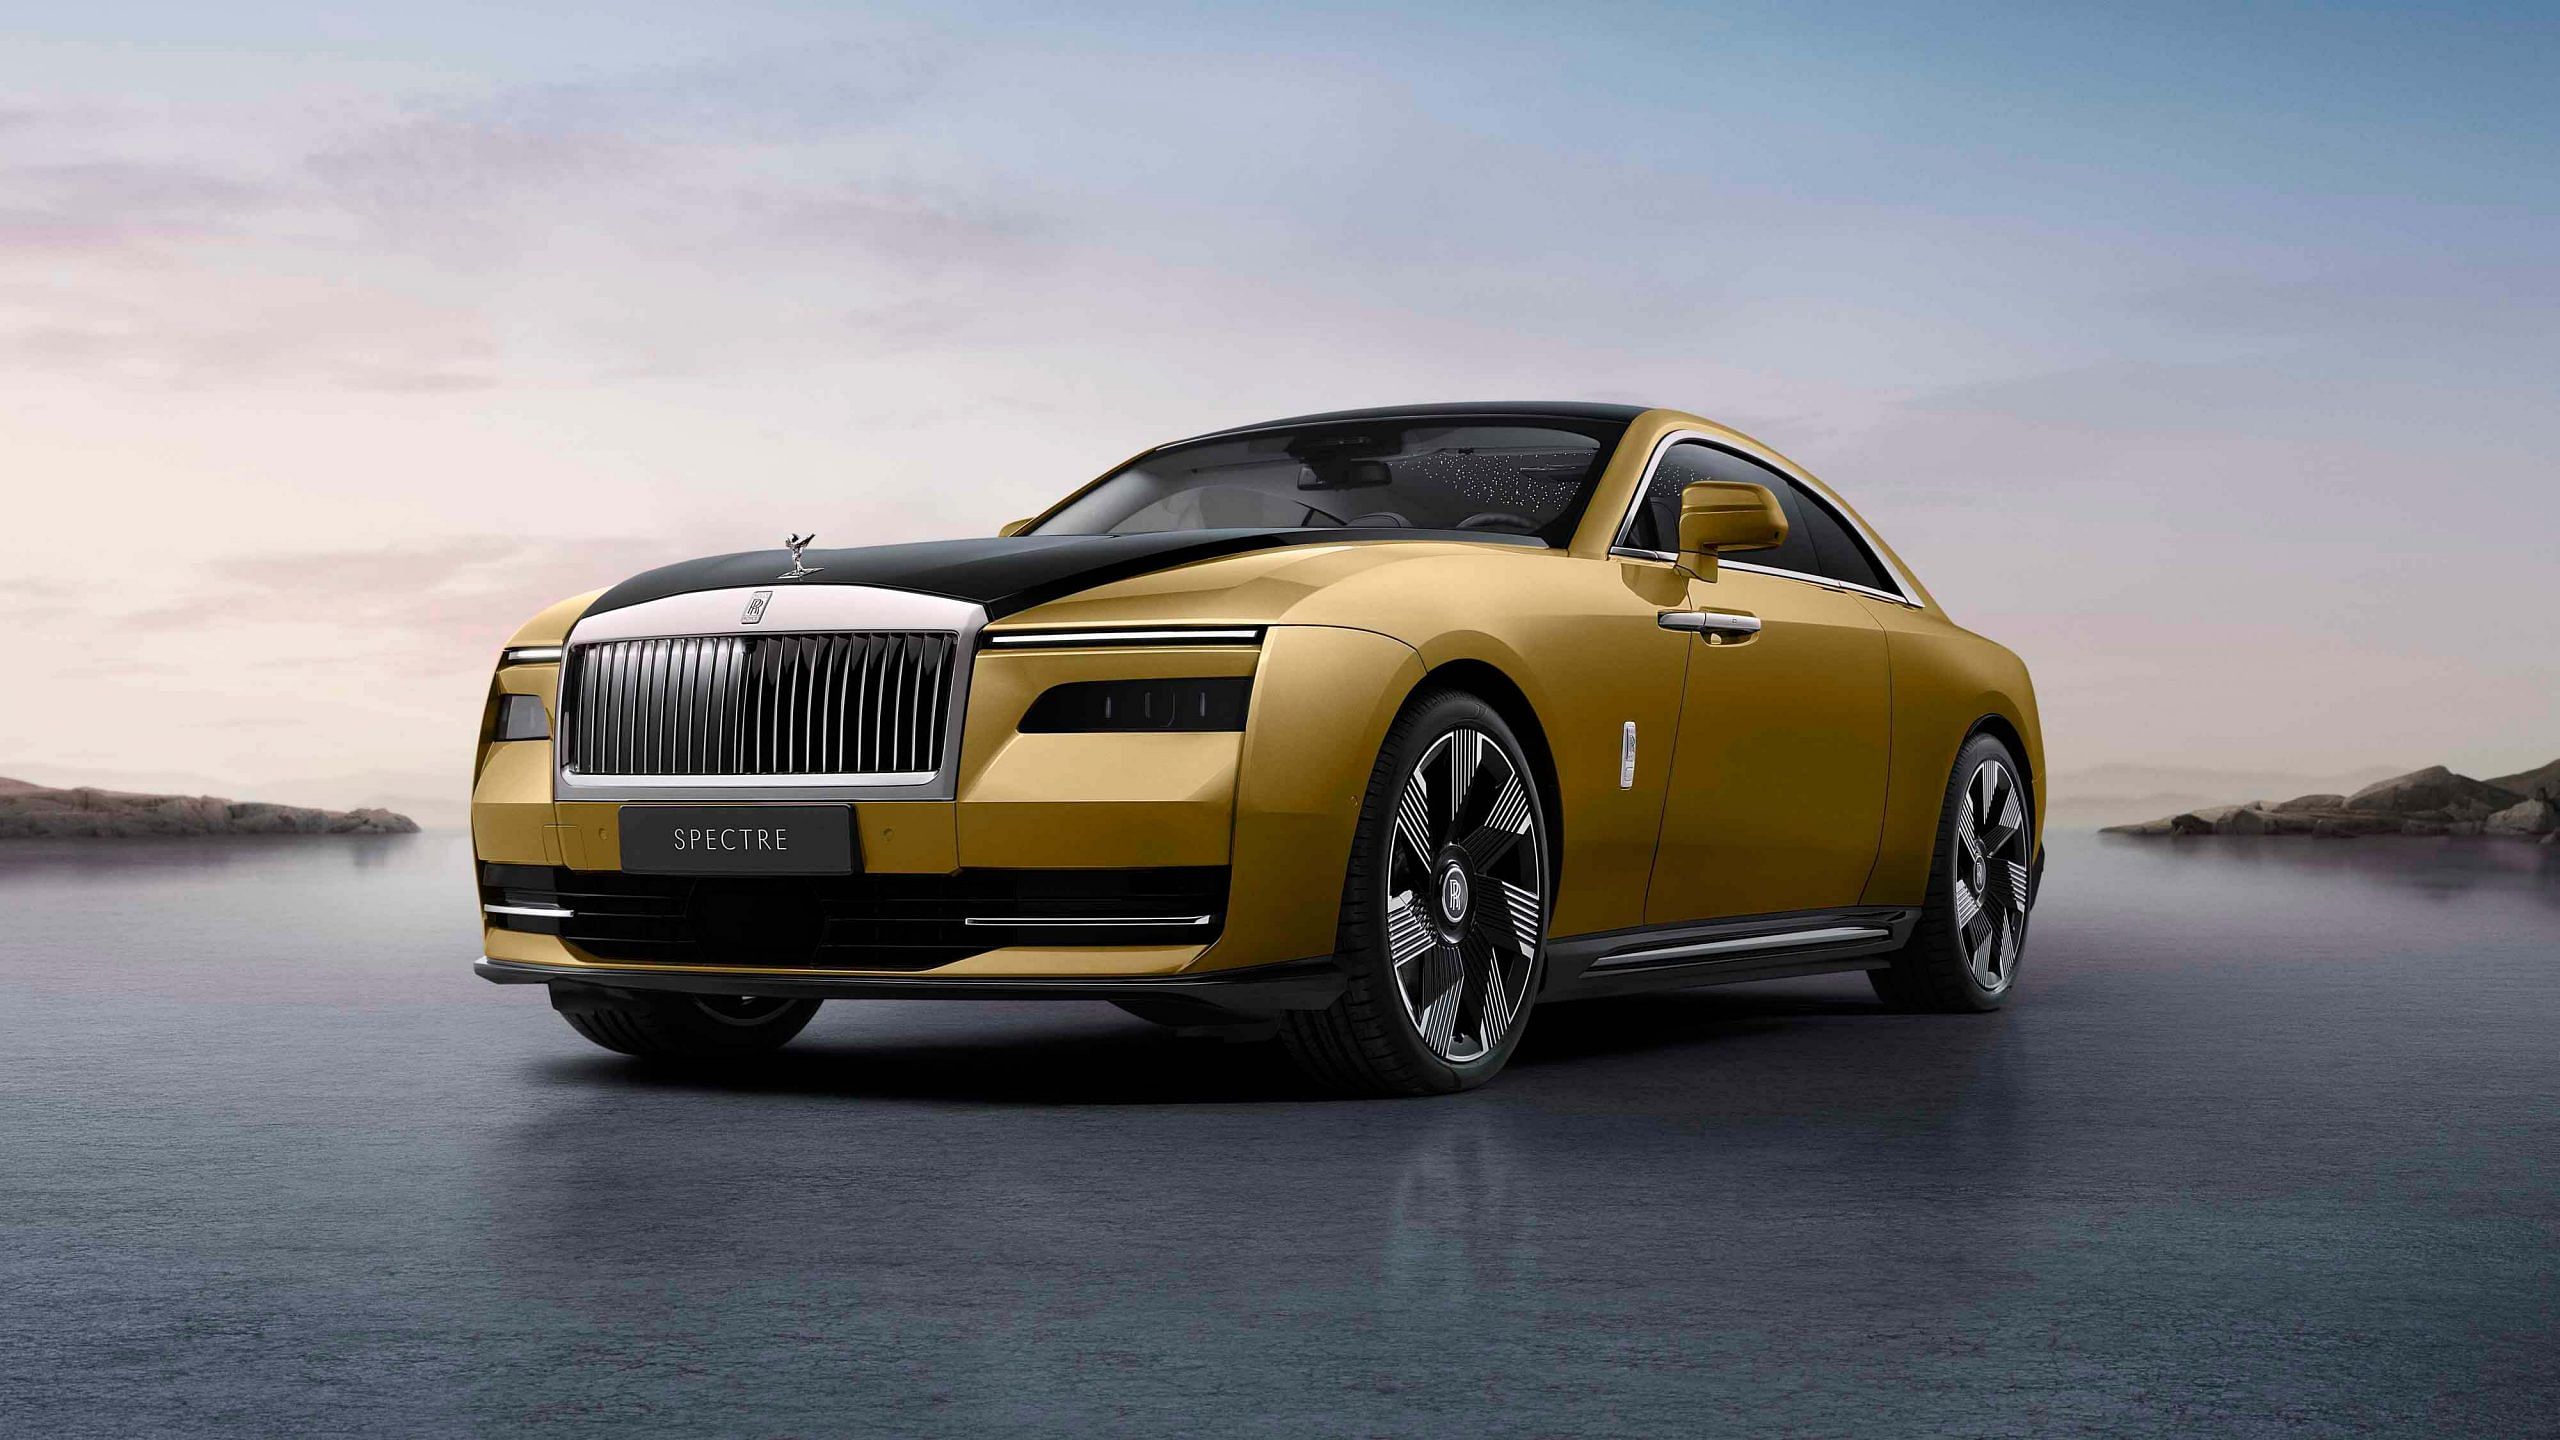 Rolls-Royce to enter the electric vehicle market with Spectre